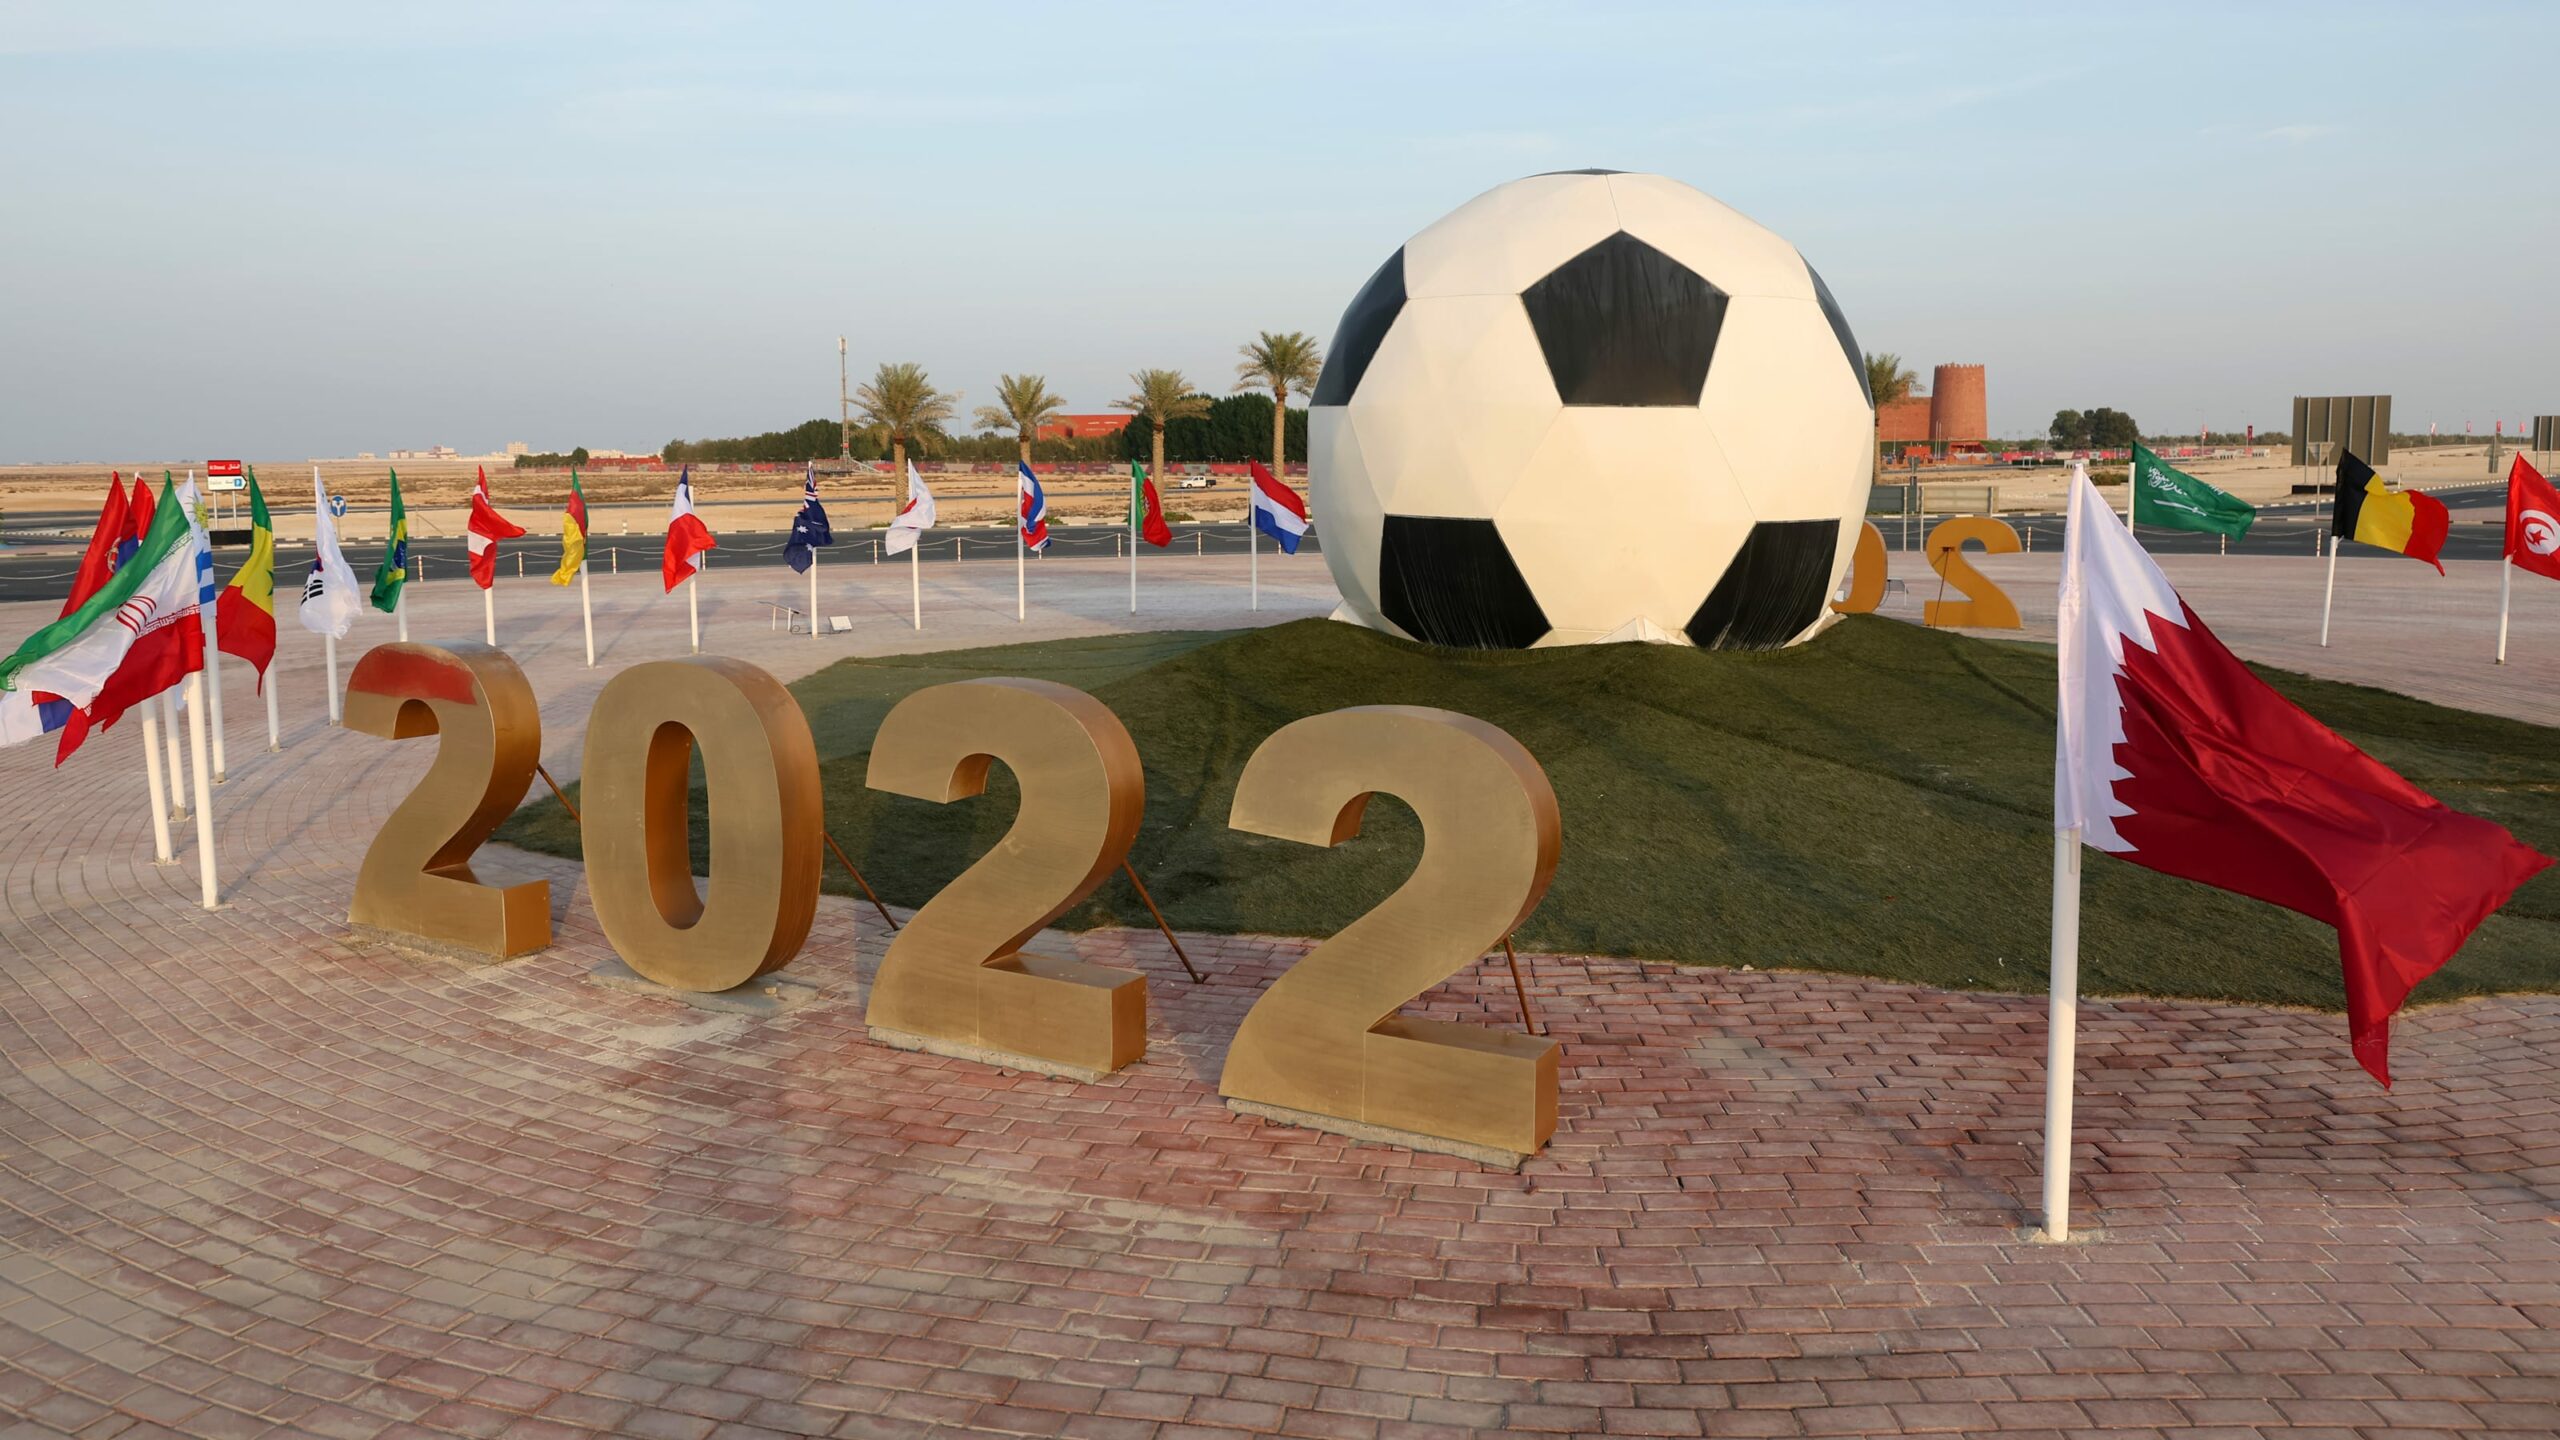 FIFA World Cup 2022 Football Matches Date and Timing Details in Hindi, FIFA World Cup 2022 Opening Ceremony Performance Name Information in Hindi, फीफा वर्ल्ड कप का पहला मैच किस दिन और किस समय खेला जायेगा ?